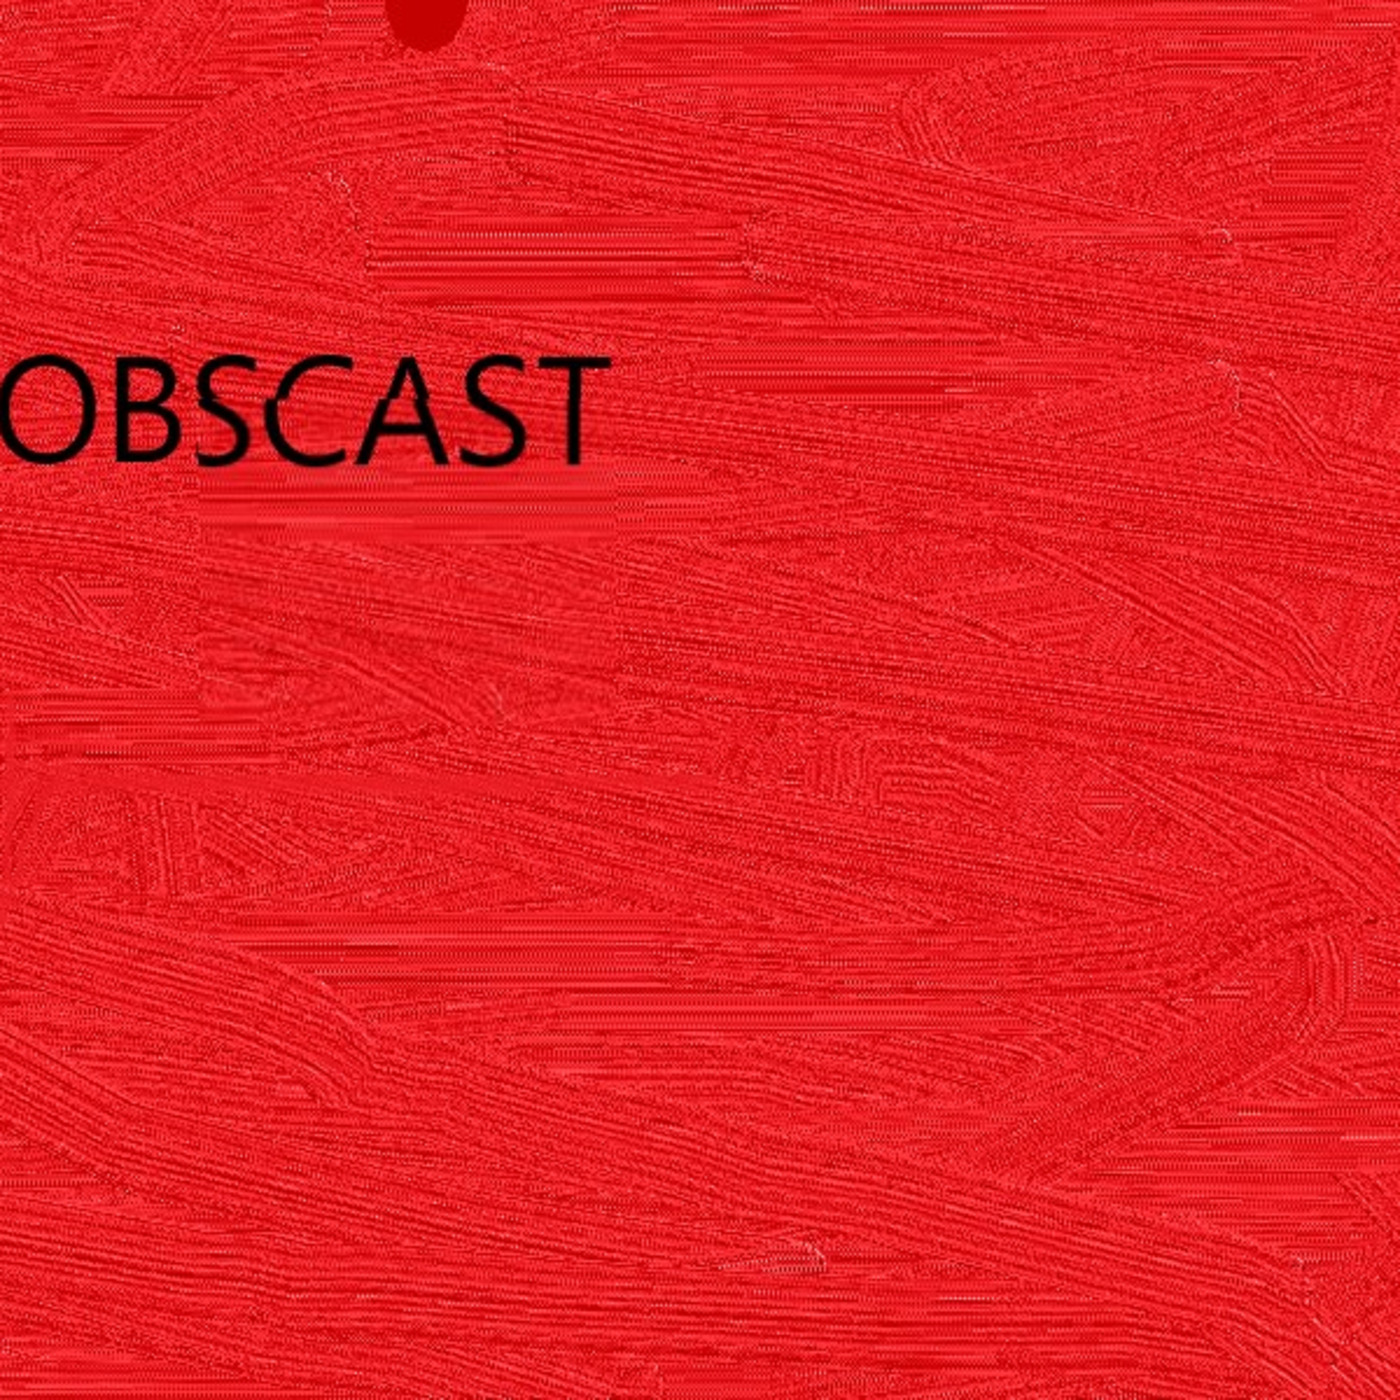 TheBOBSCAST